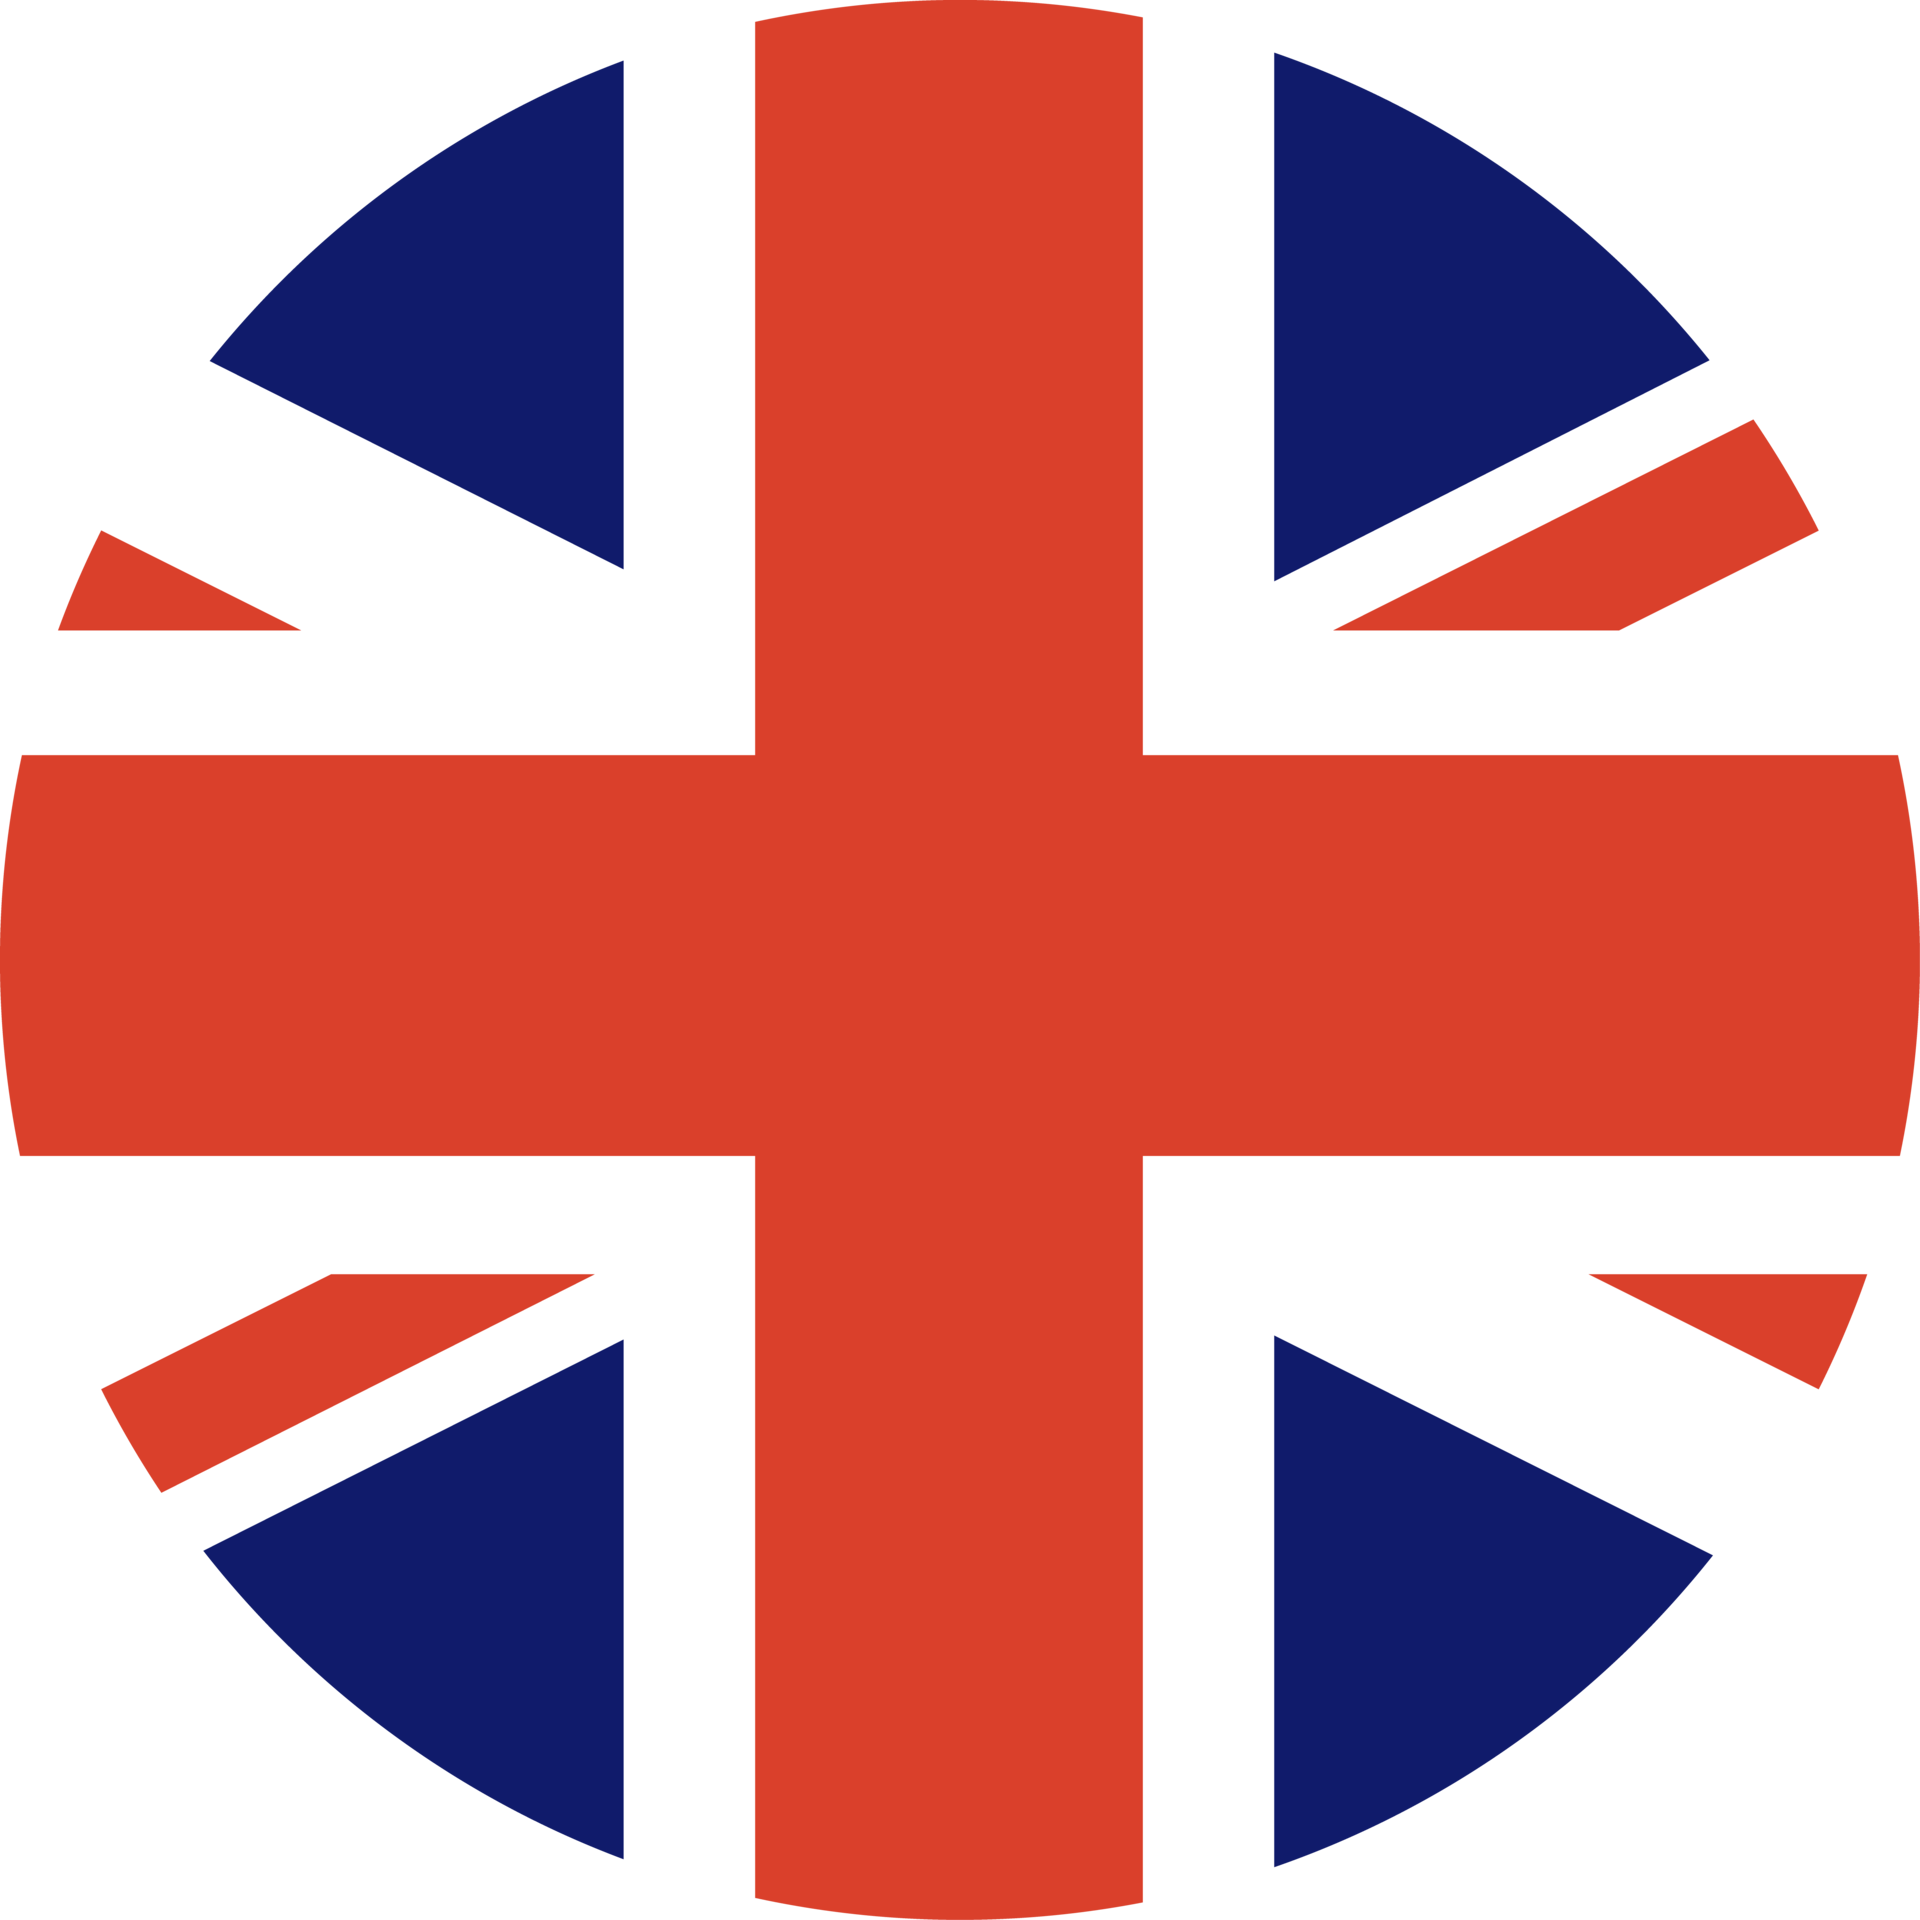 united-kingdom-flag-round-icon-uk-flag-symbol-official-color-scheme-british-flag-in-circle-circular-button-banner-national-sign-png